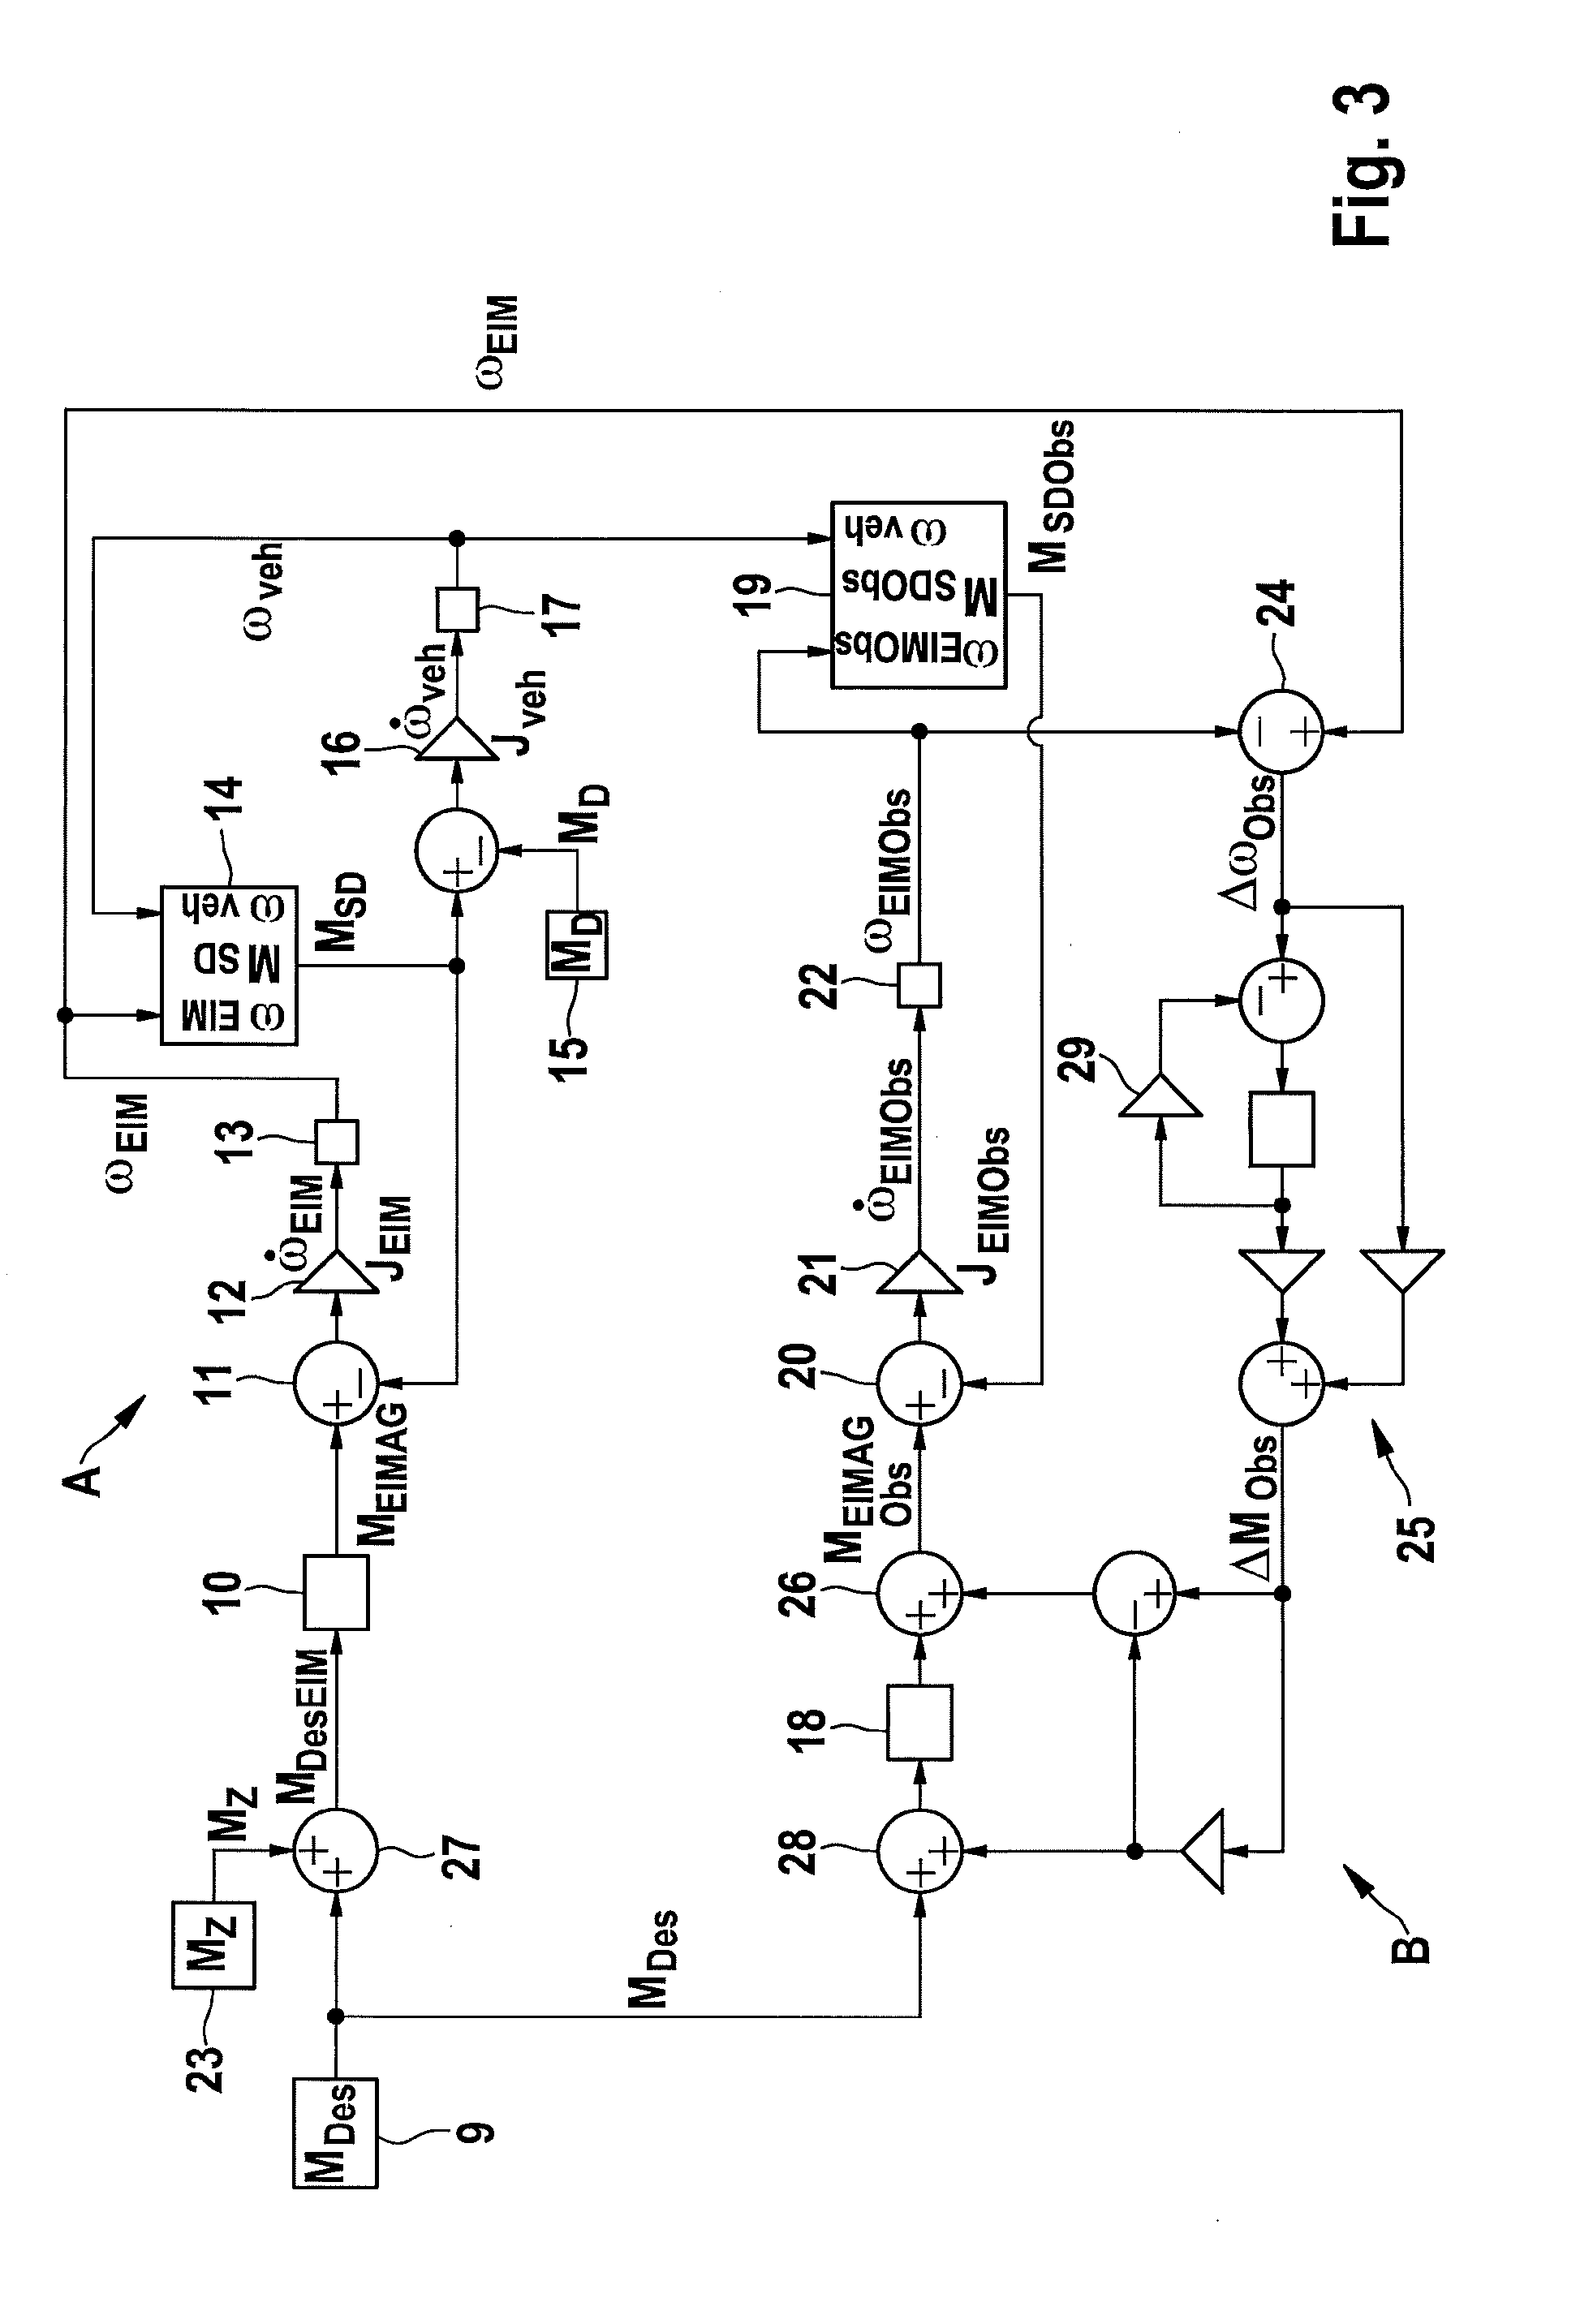 Method and device for recognizing unintended drive train responses of a motor vehicle having at least one drive unit